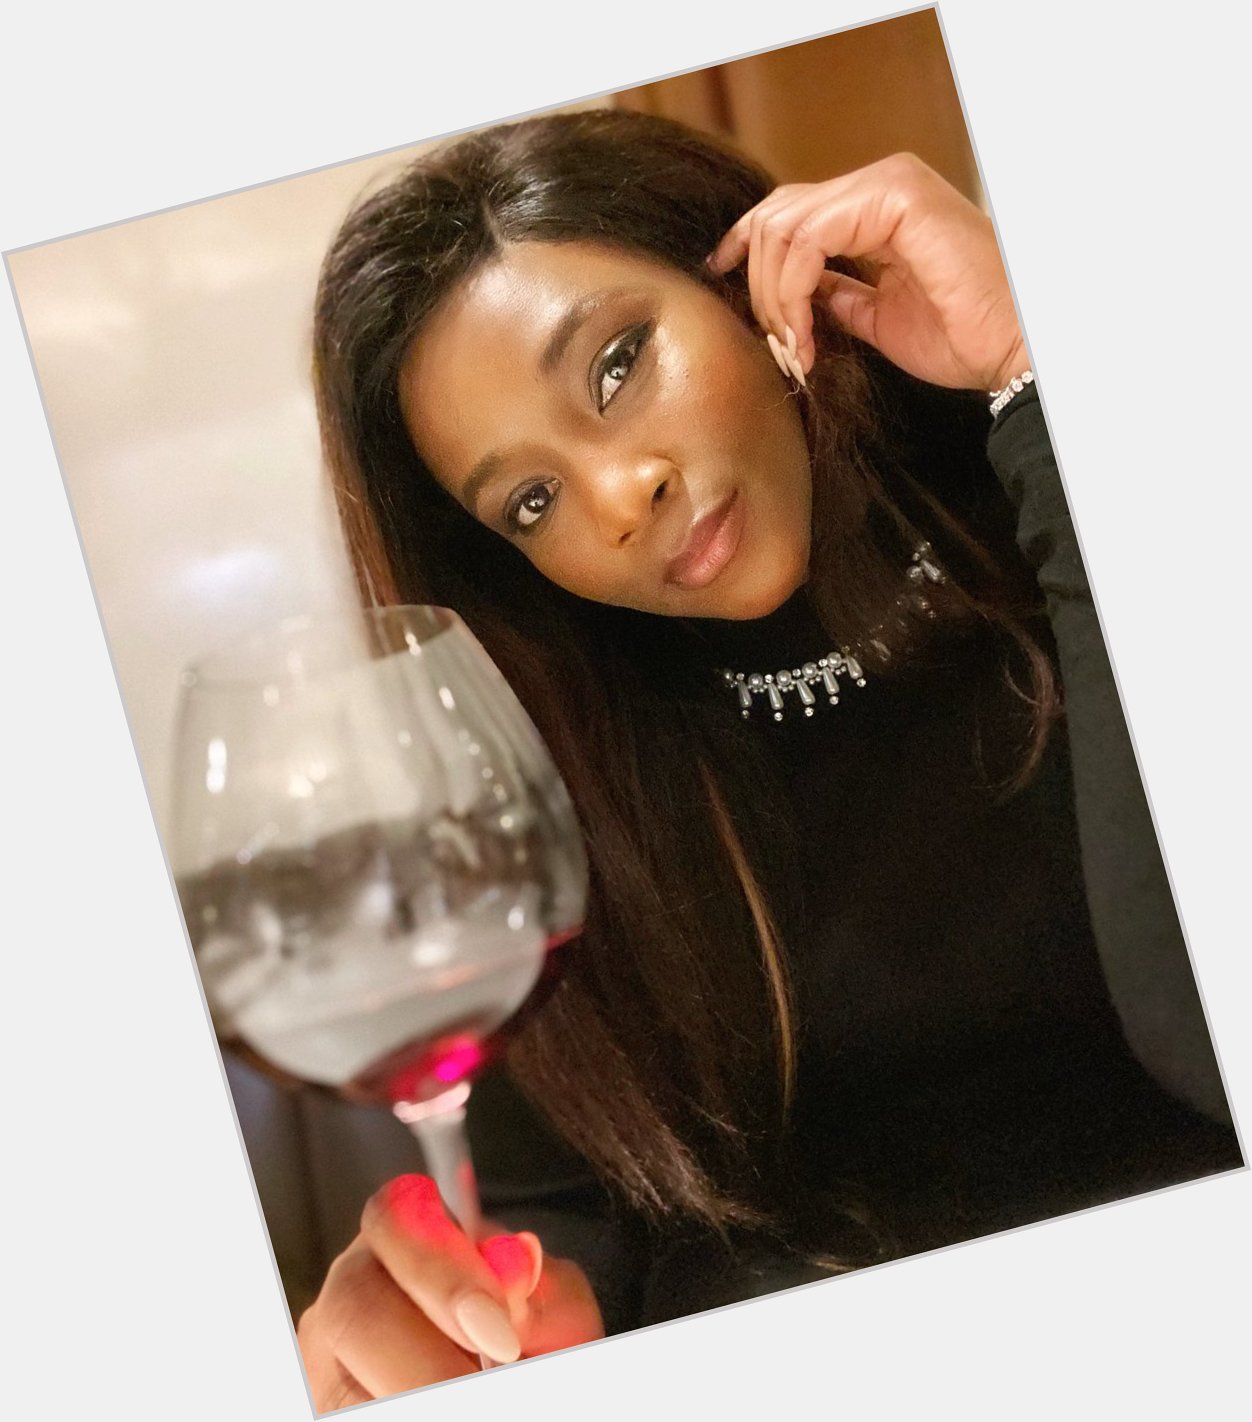 World Genevieve Nnaji day!!!    Happy birthday Queen! 
Cheers to 44!
A holiday for me IDC 